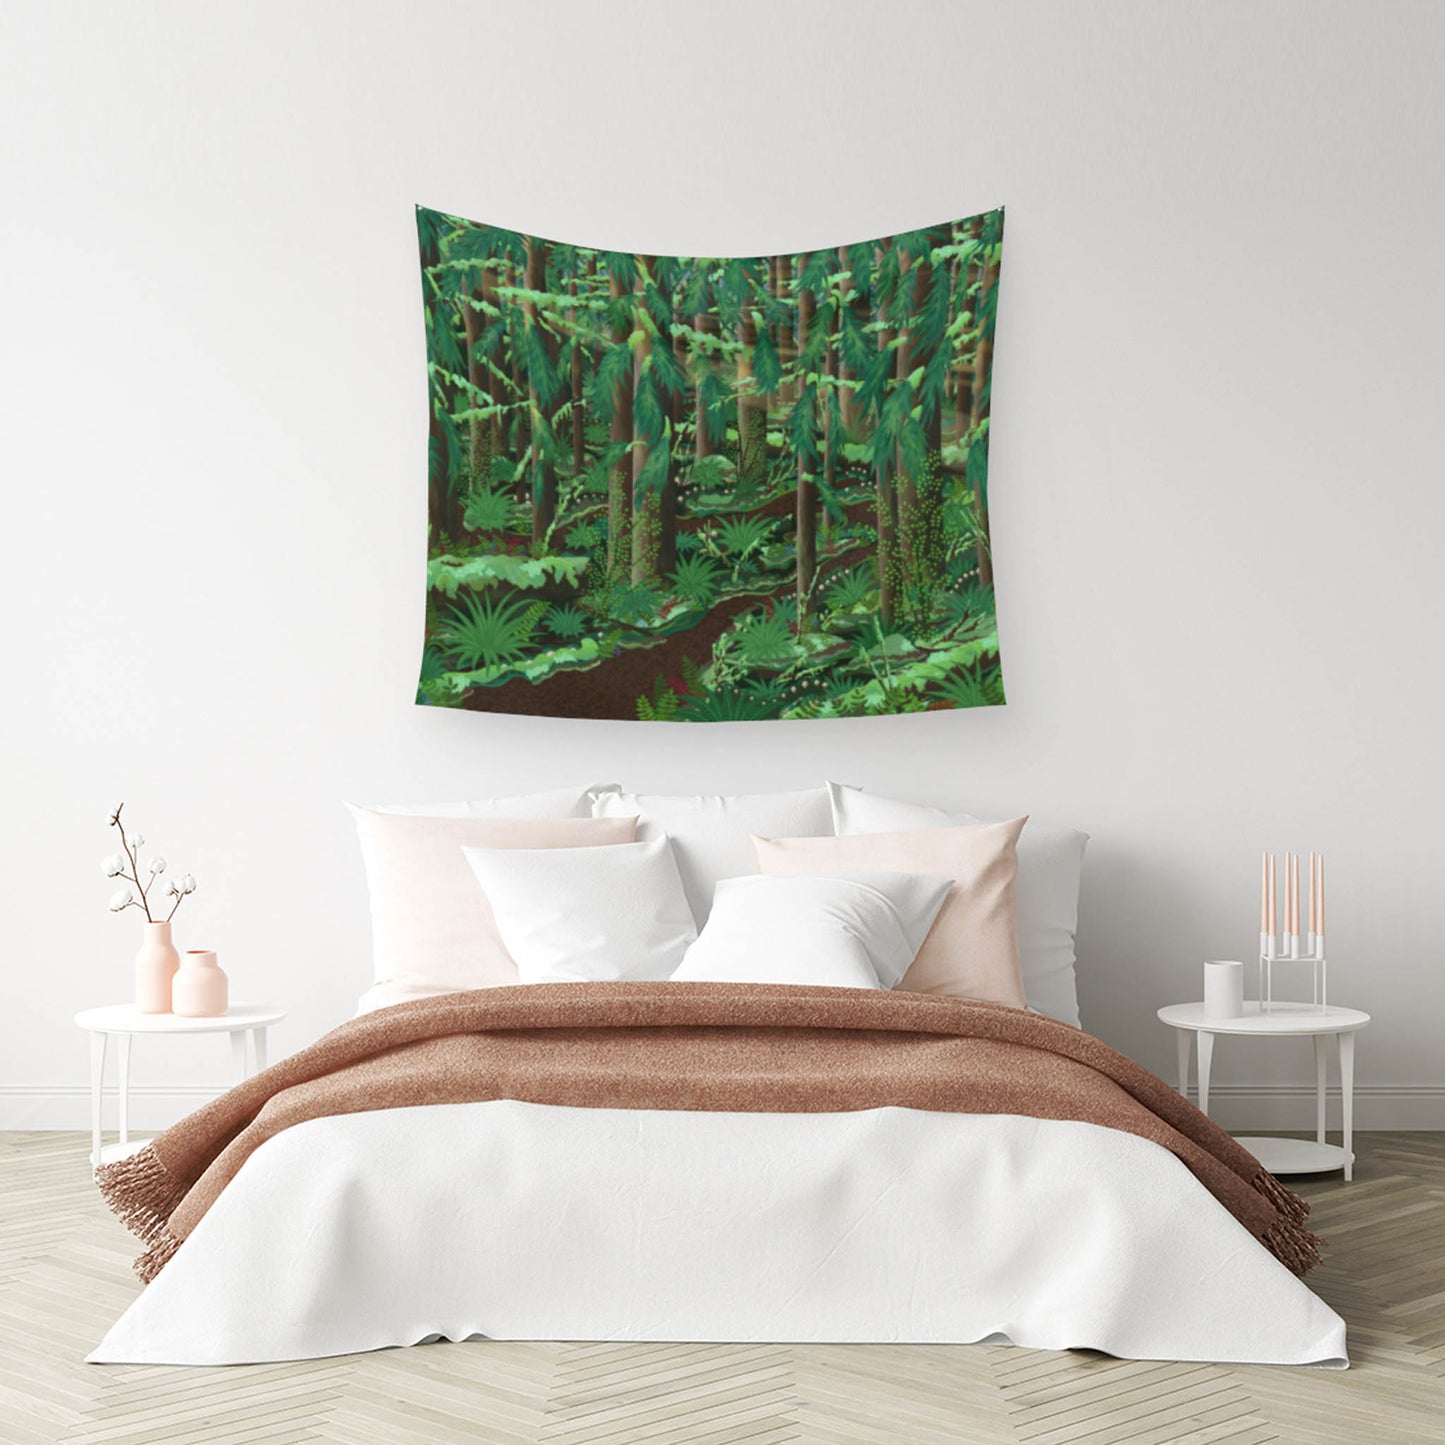 mockup for tapestry on wall with digital design showing a trail in the forest amongst the many trees and their branches branching out as the sun selectively slips through as certain sunbeams above all the mushrooms, ferns, firs and moss hanging above a typical bed with approximately seven pillows but only two blankets